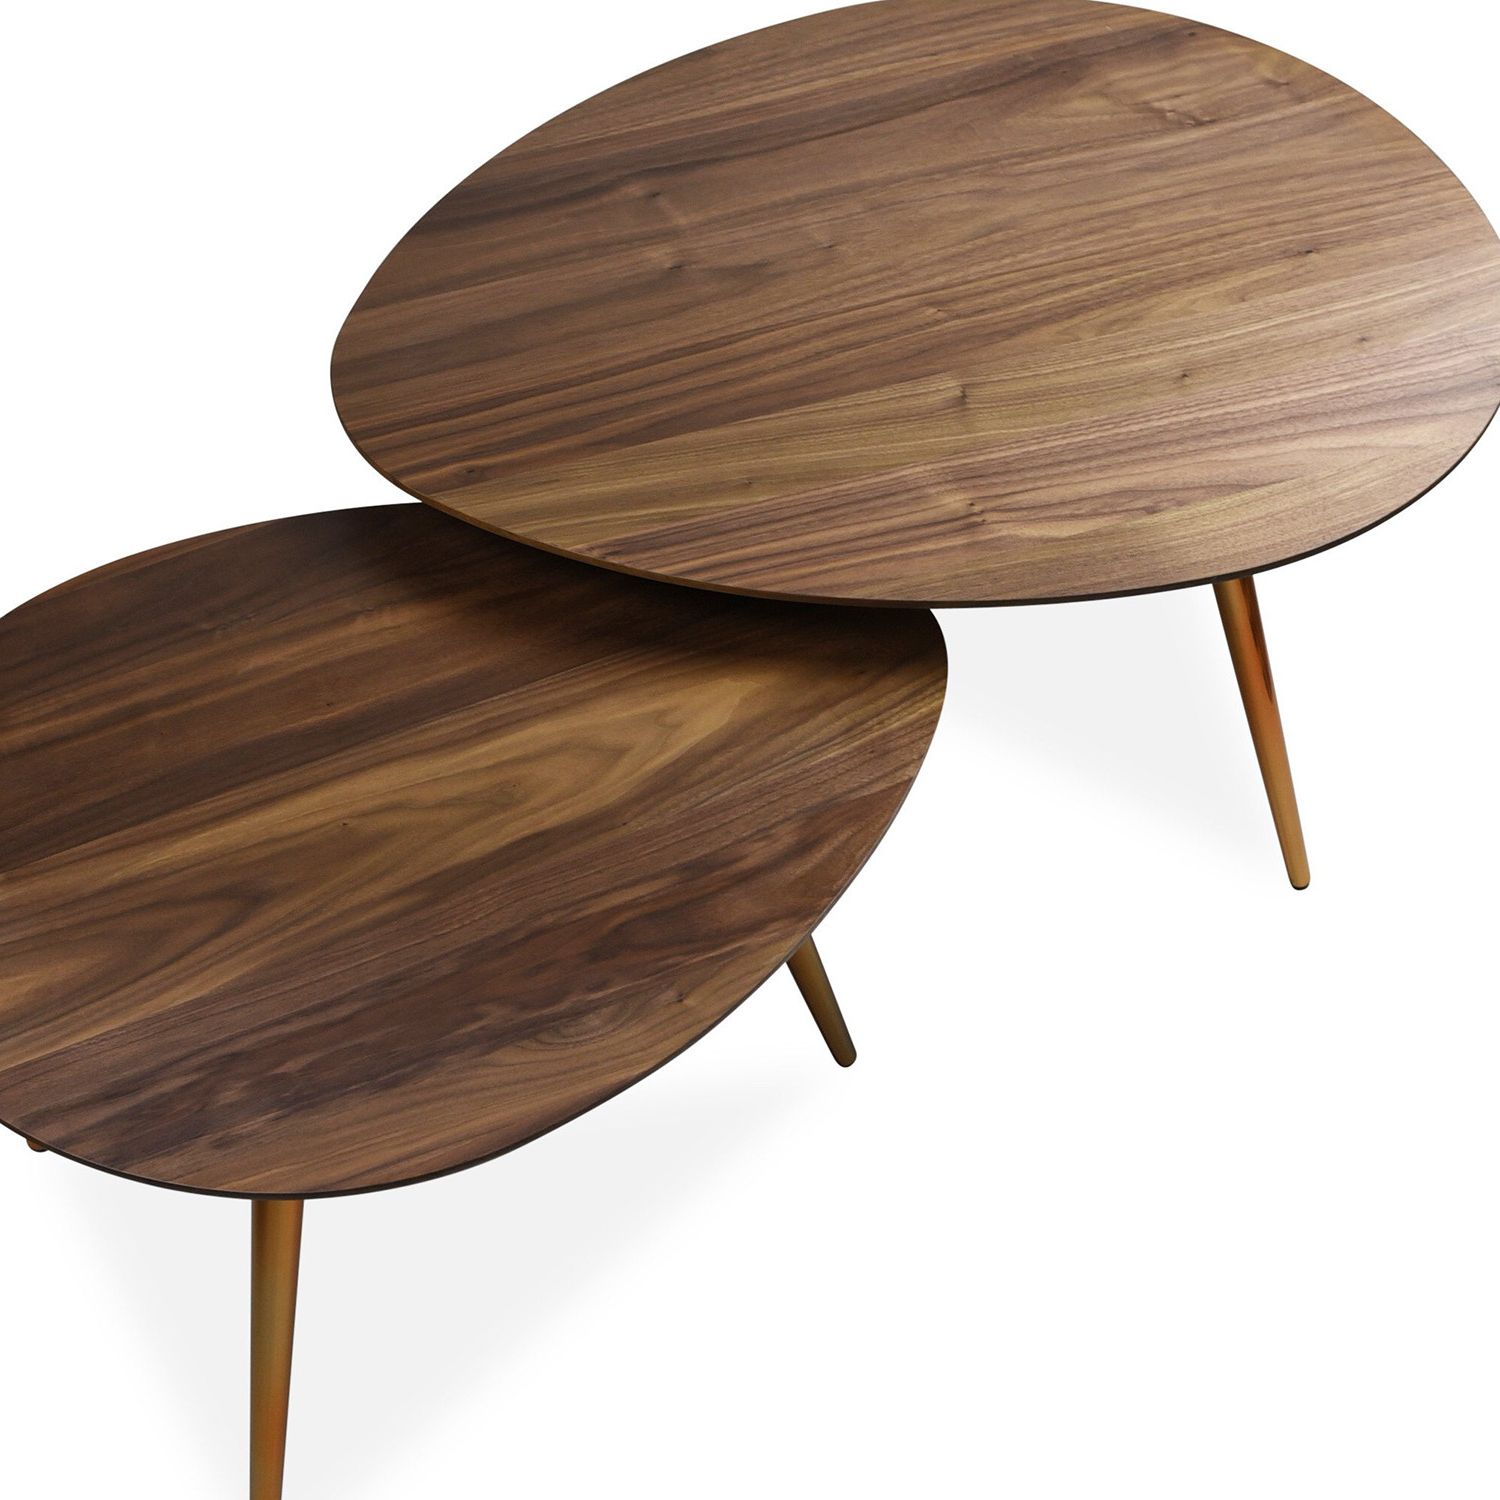 2019 Mid Century Modern Coffee Tables Inside Maddox Mid Century Modern Nesting Coffee Table Set – Edloe Finch (View 8 of 15)